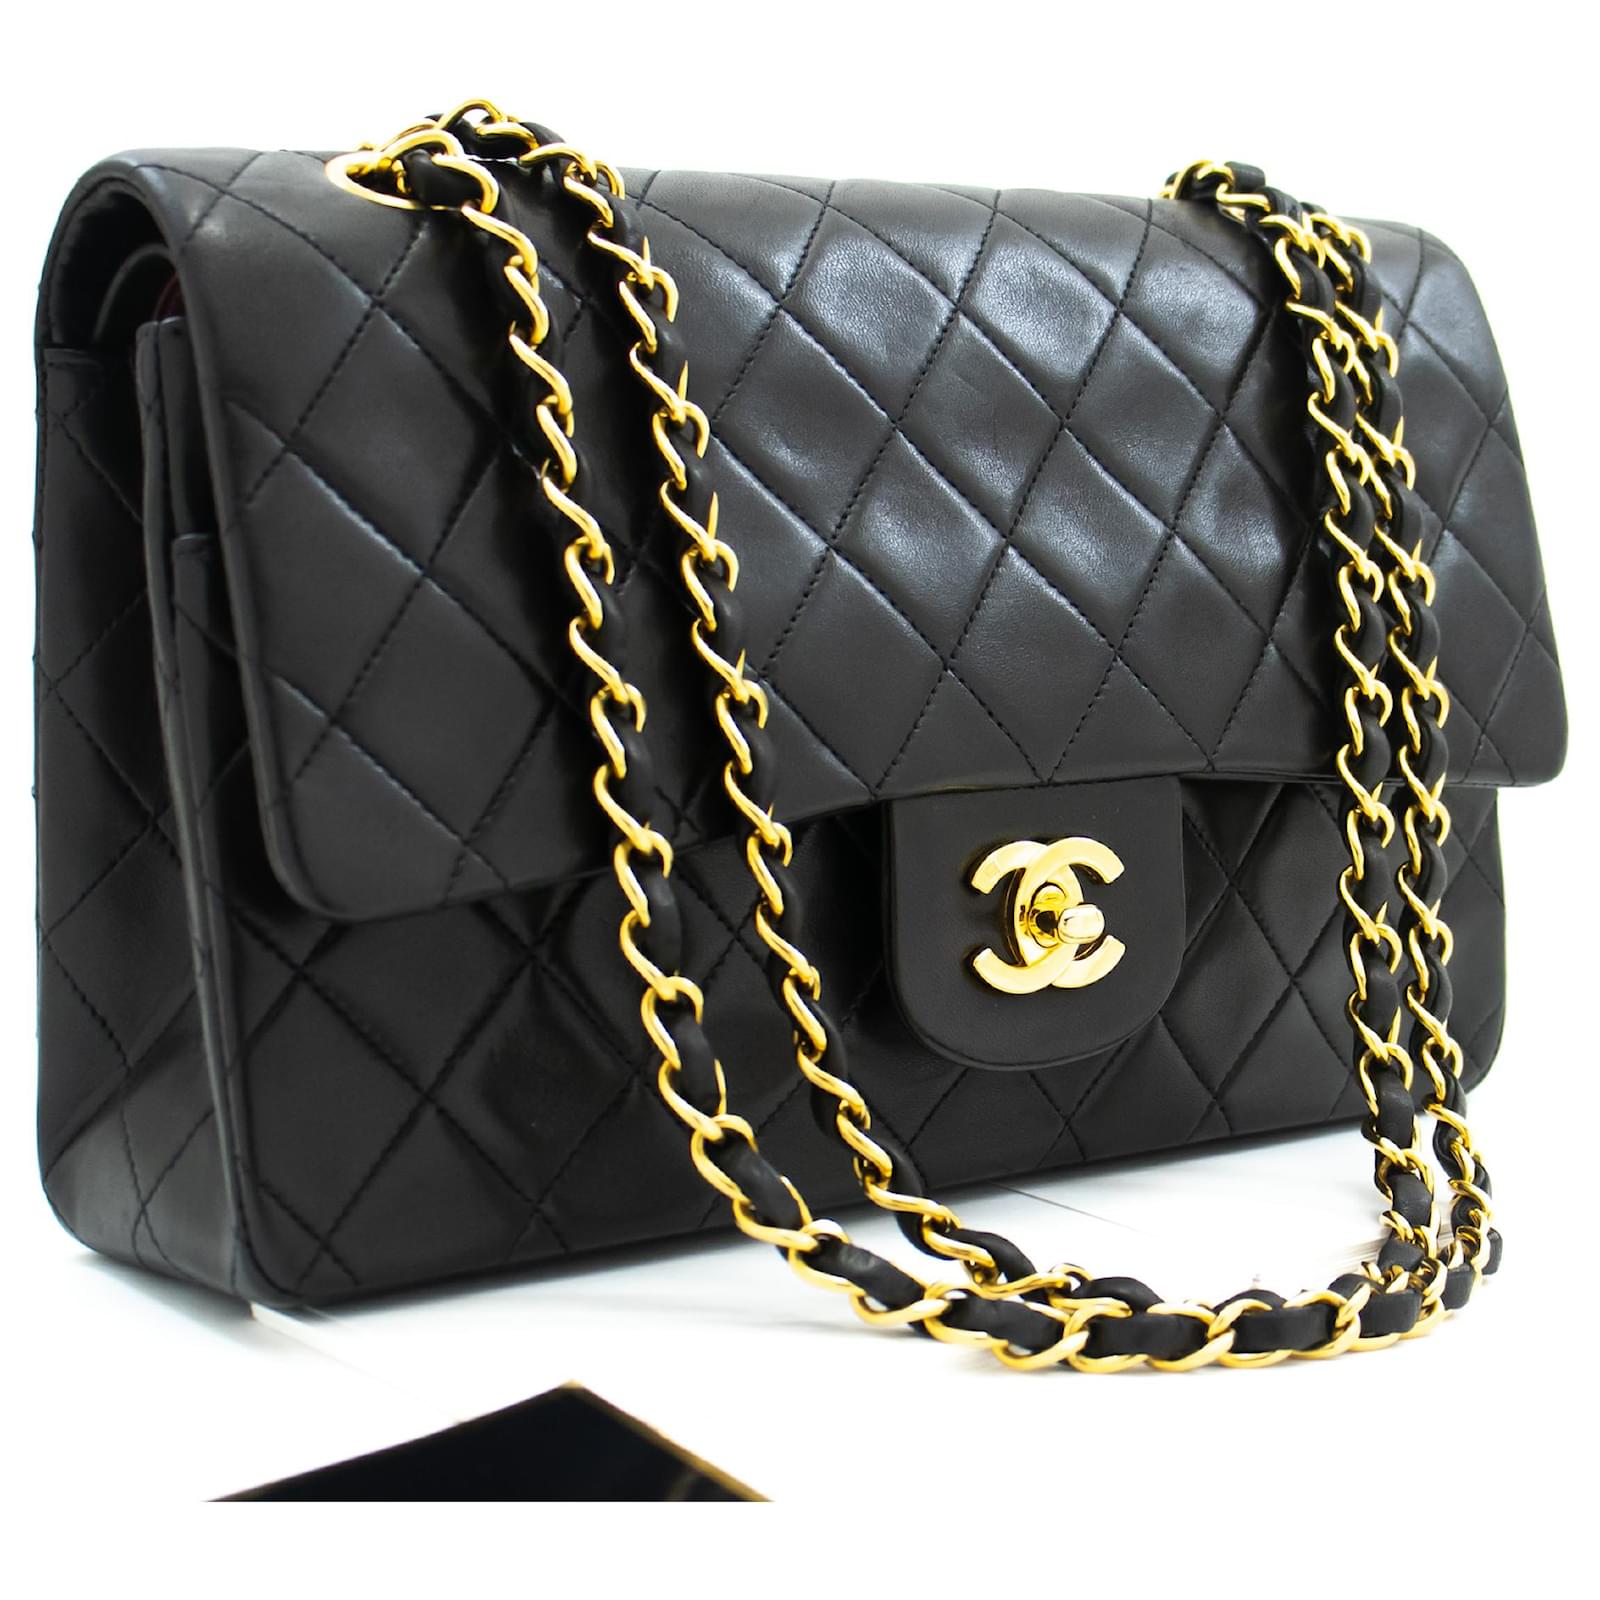 CHANEL, Bags, Auth Vintage Chanel Leather Luxe Ligne Bowler Bag